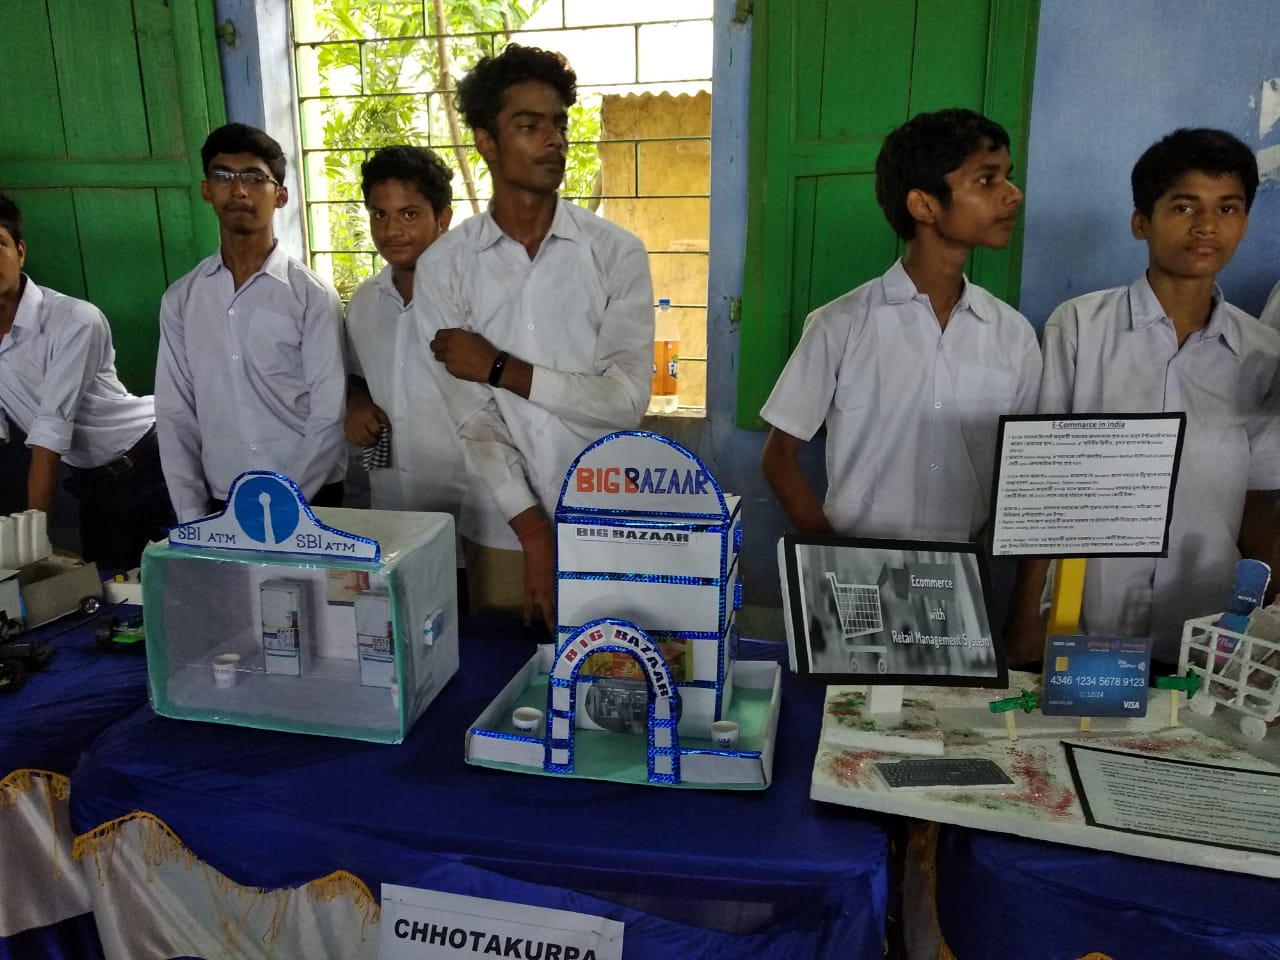  Excellent initiative by HM of Joypur High School at Bankura for arranging a district level Model Exhibition of students who are pursuing the vocational education under CSS-VSE.